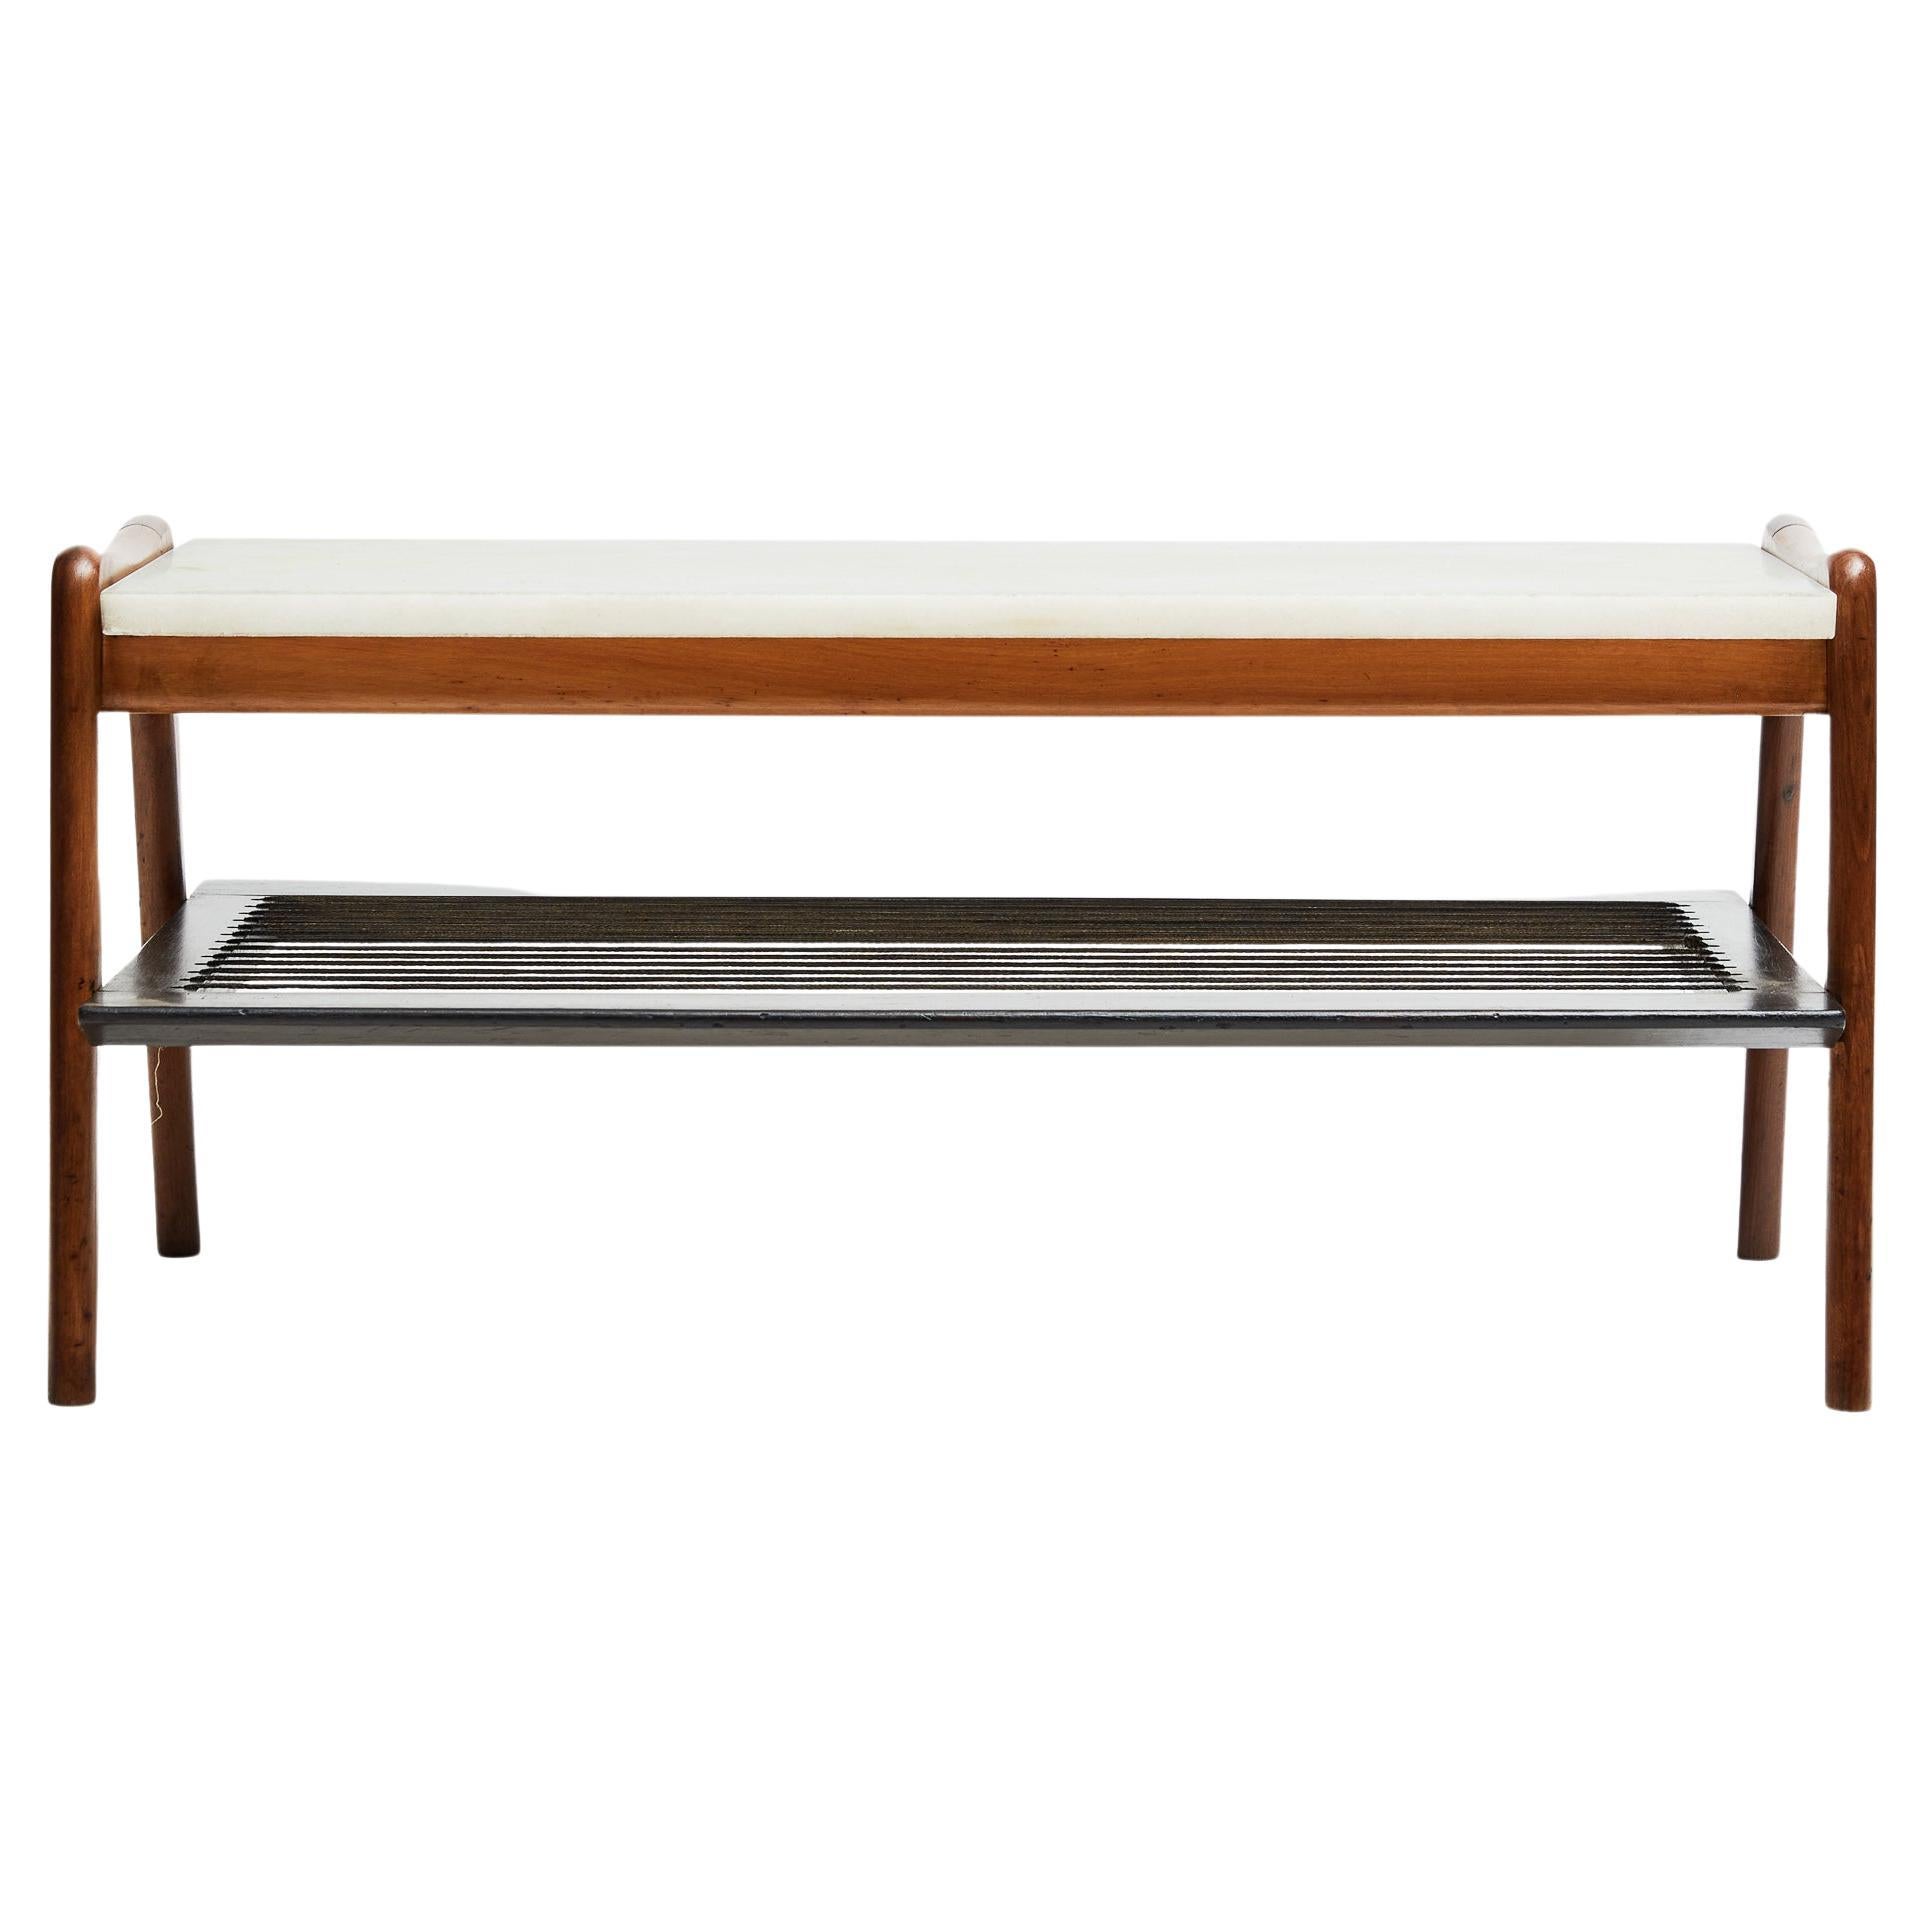 Available today, this Mid-Century Modern Coffee Table designed by Moveis Bergamo in the fifties is gorgeous! 

This rare and elegant coffee table is made of two types of hardwood: Pau Marfim (ebony) and light brown Caviuna. The lower stage consists